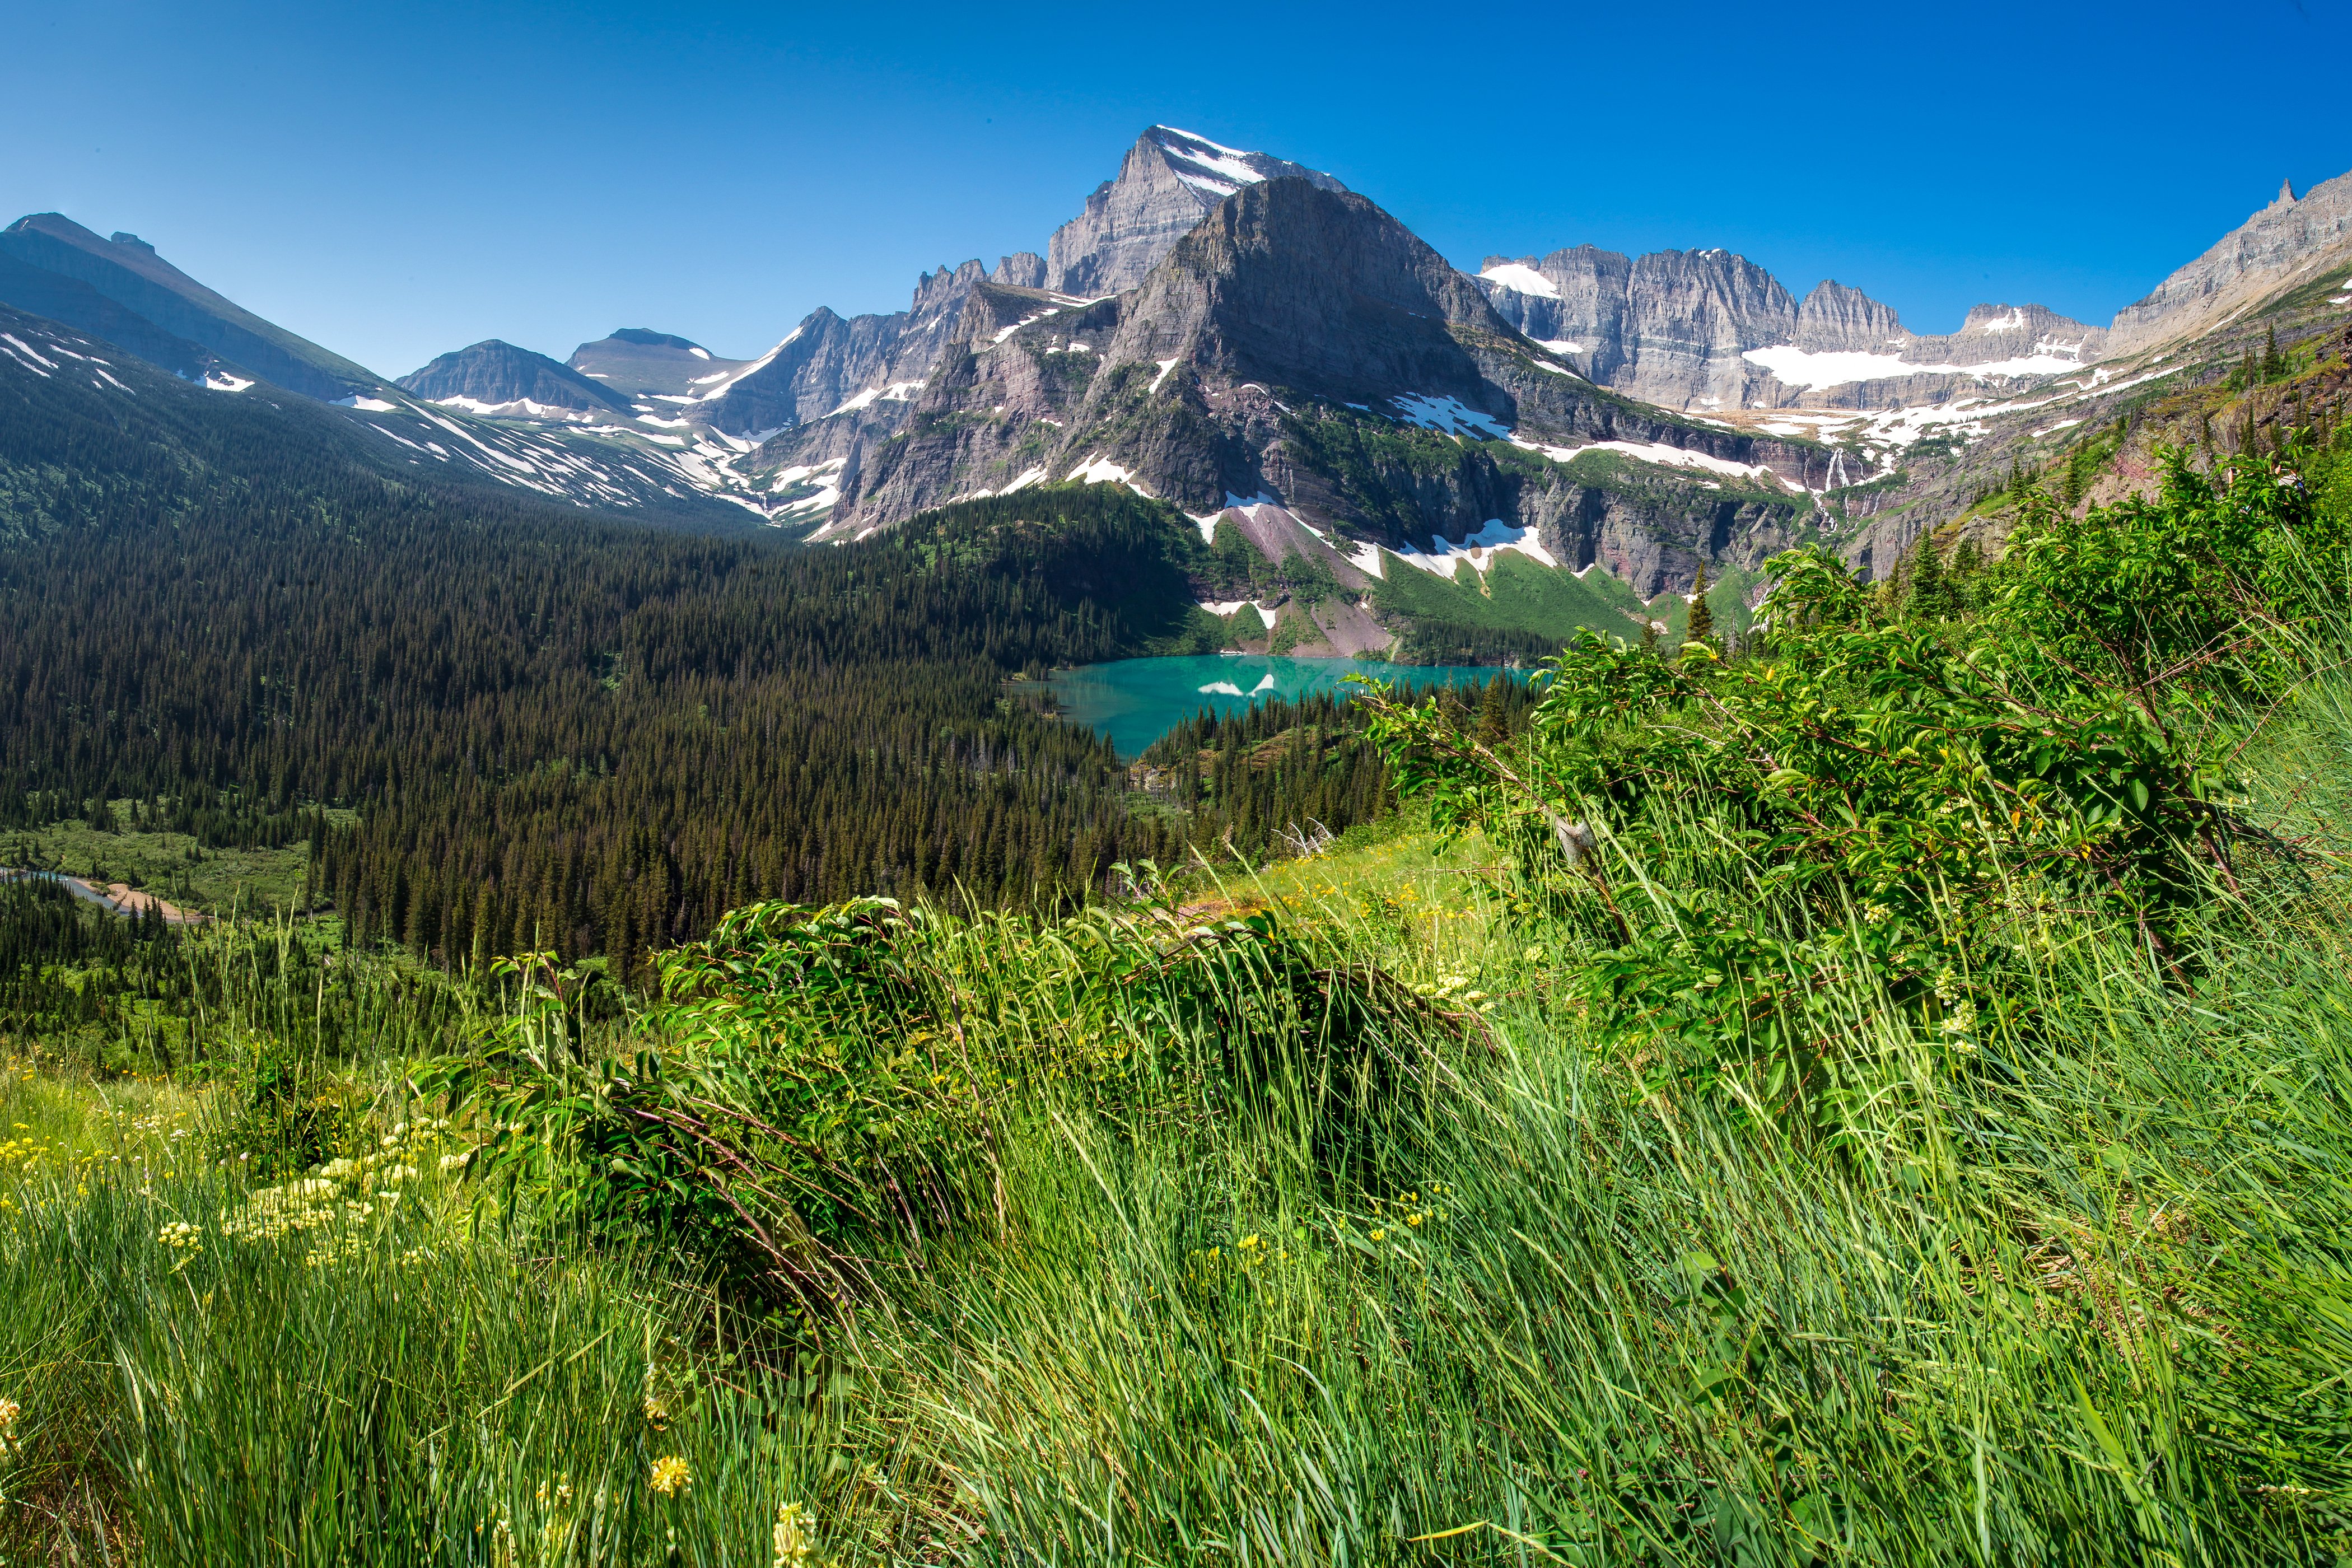 usa, Parks, Mountains, Lake, Forests, Scenery, Grass, Grinnell, Lake, Glacier, Nature Wallpaper